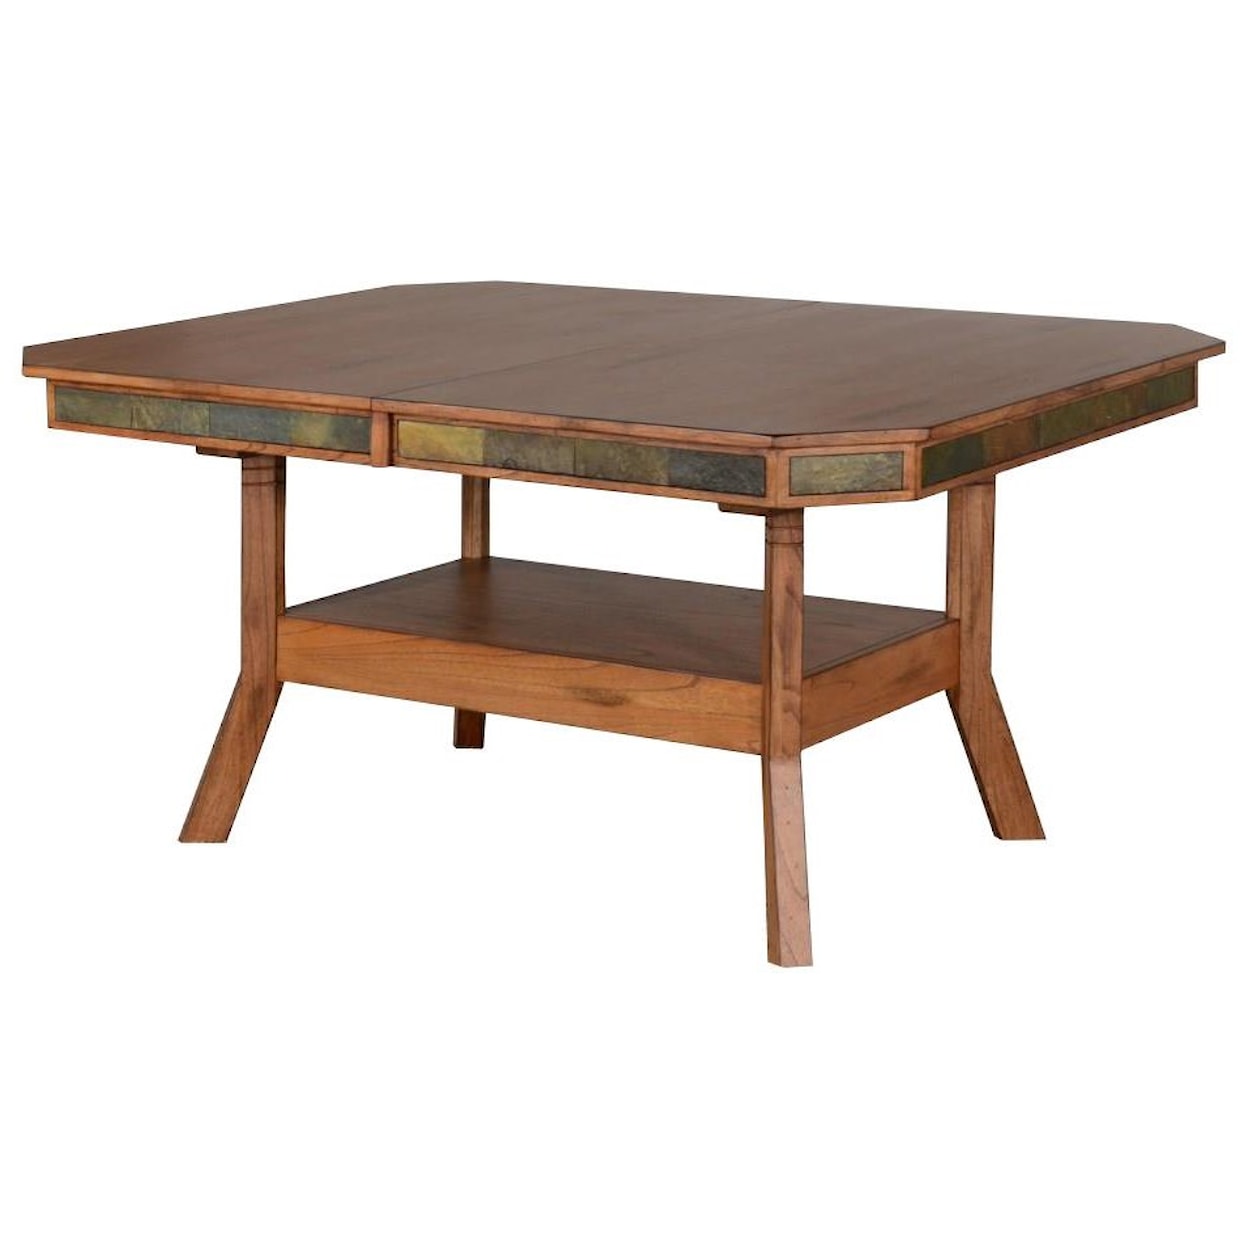 Sunny Designs   Dual Height Dining Table w/ 2 Leaves